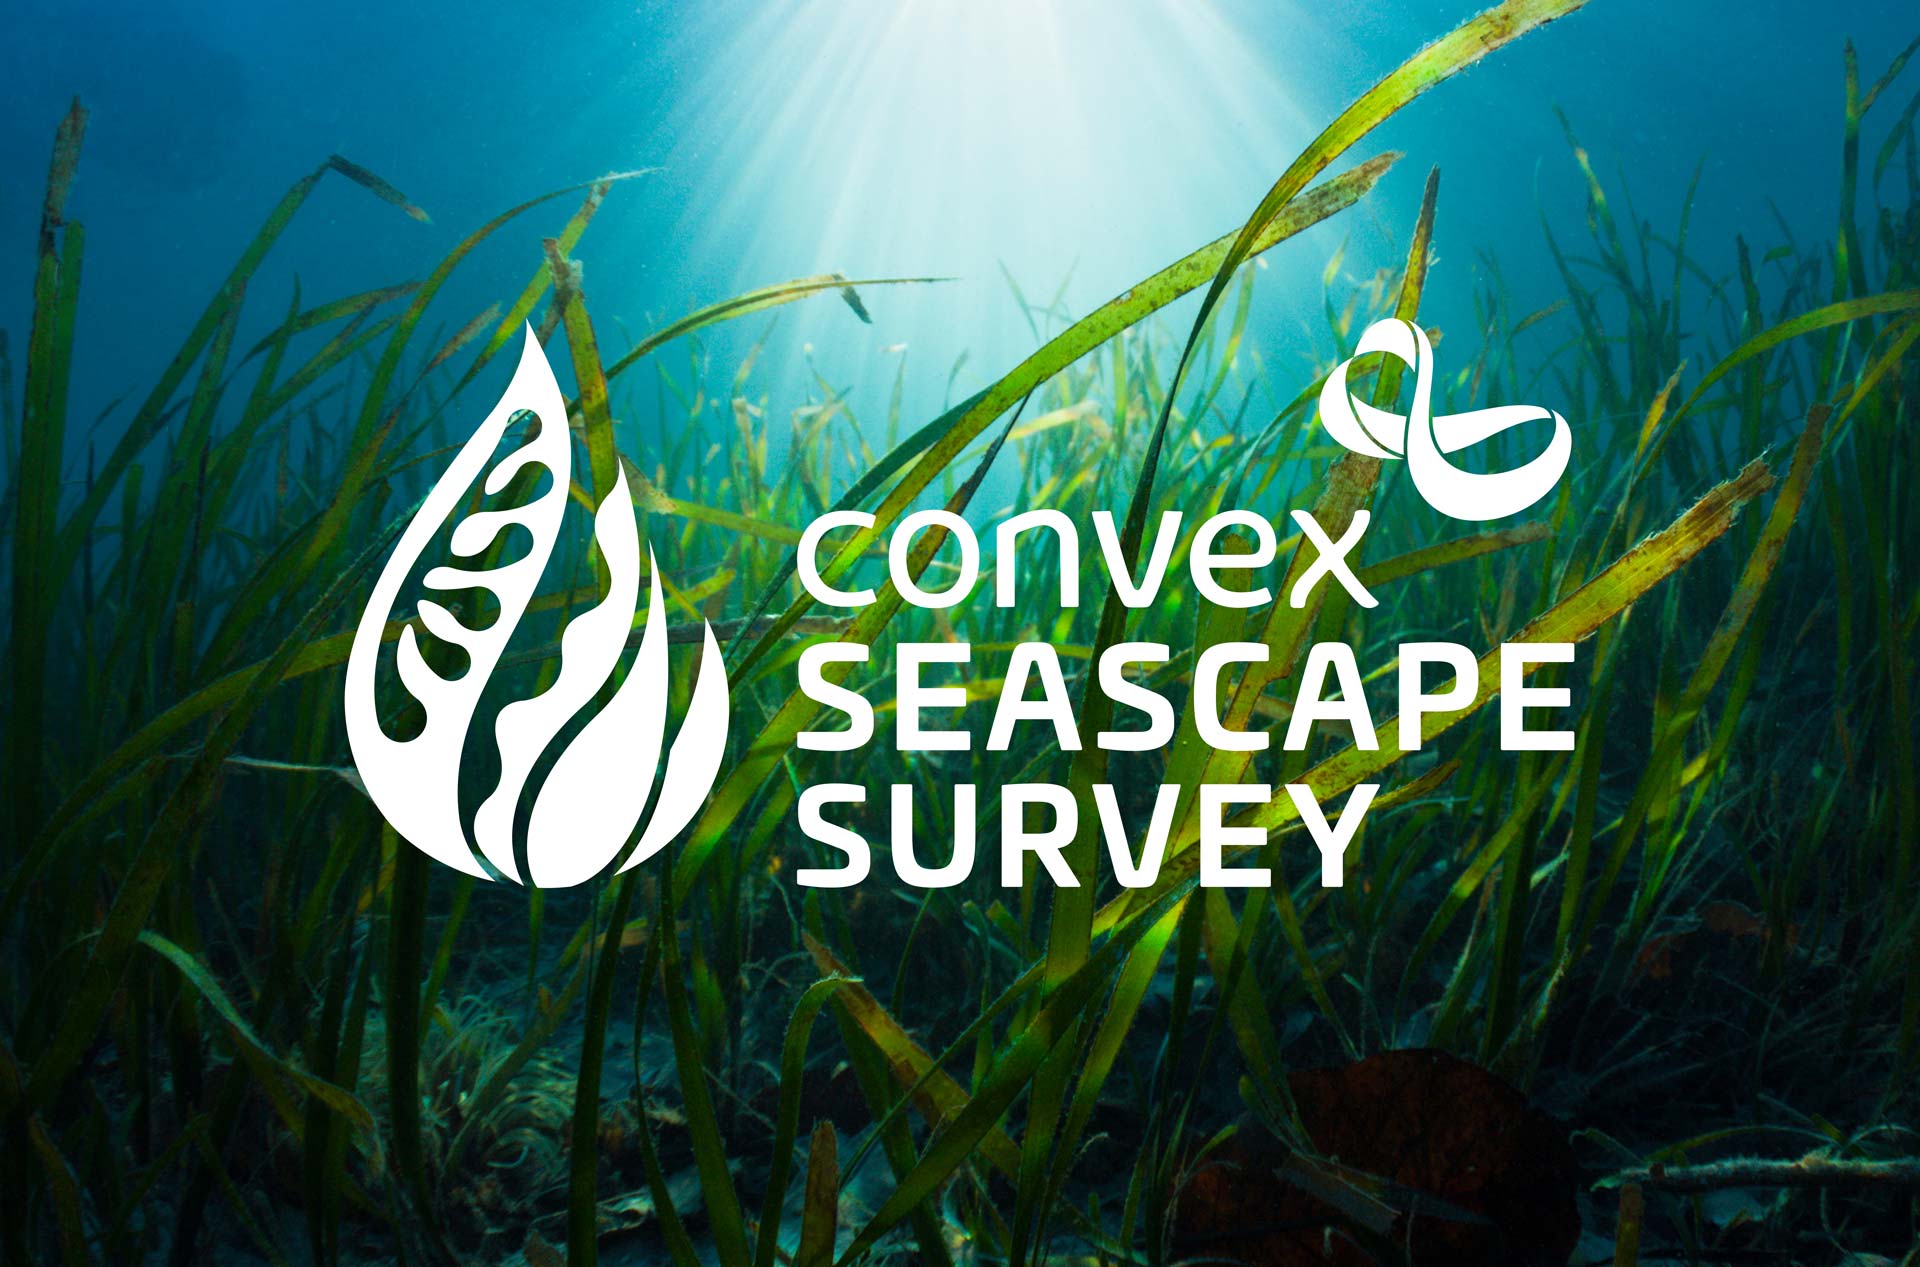 The Convex Seascape Survey Logo over an ocean seabed image